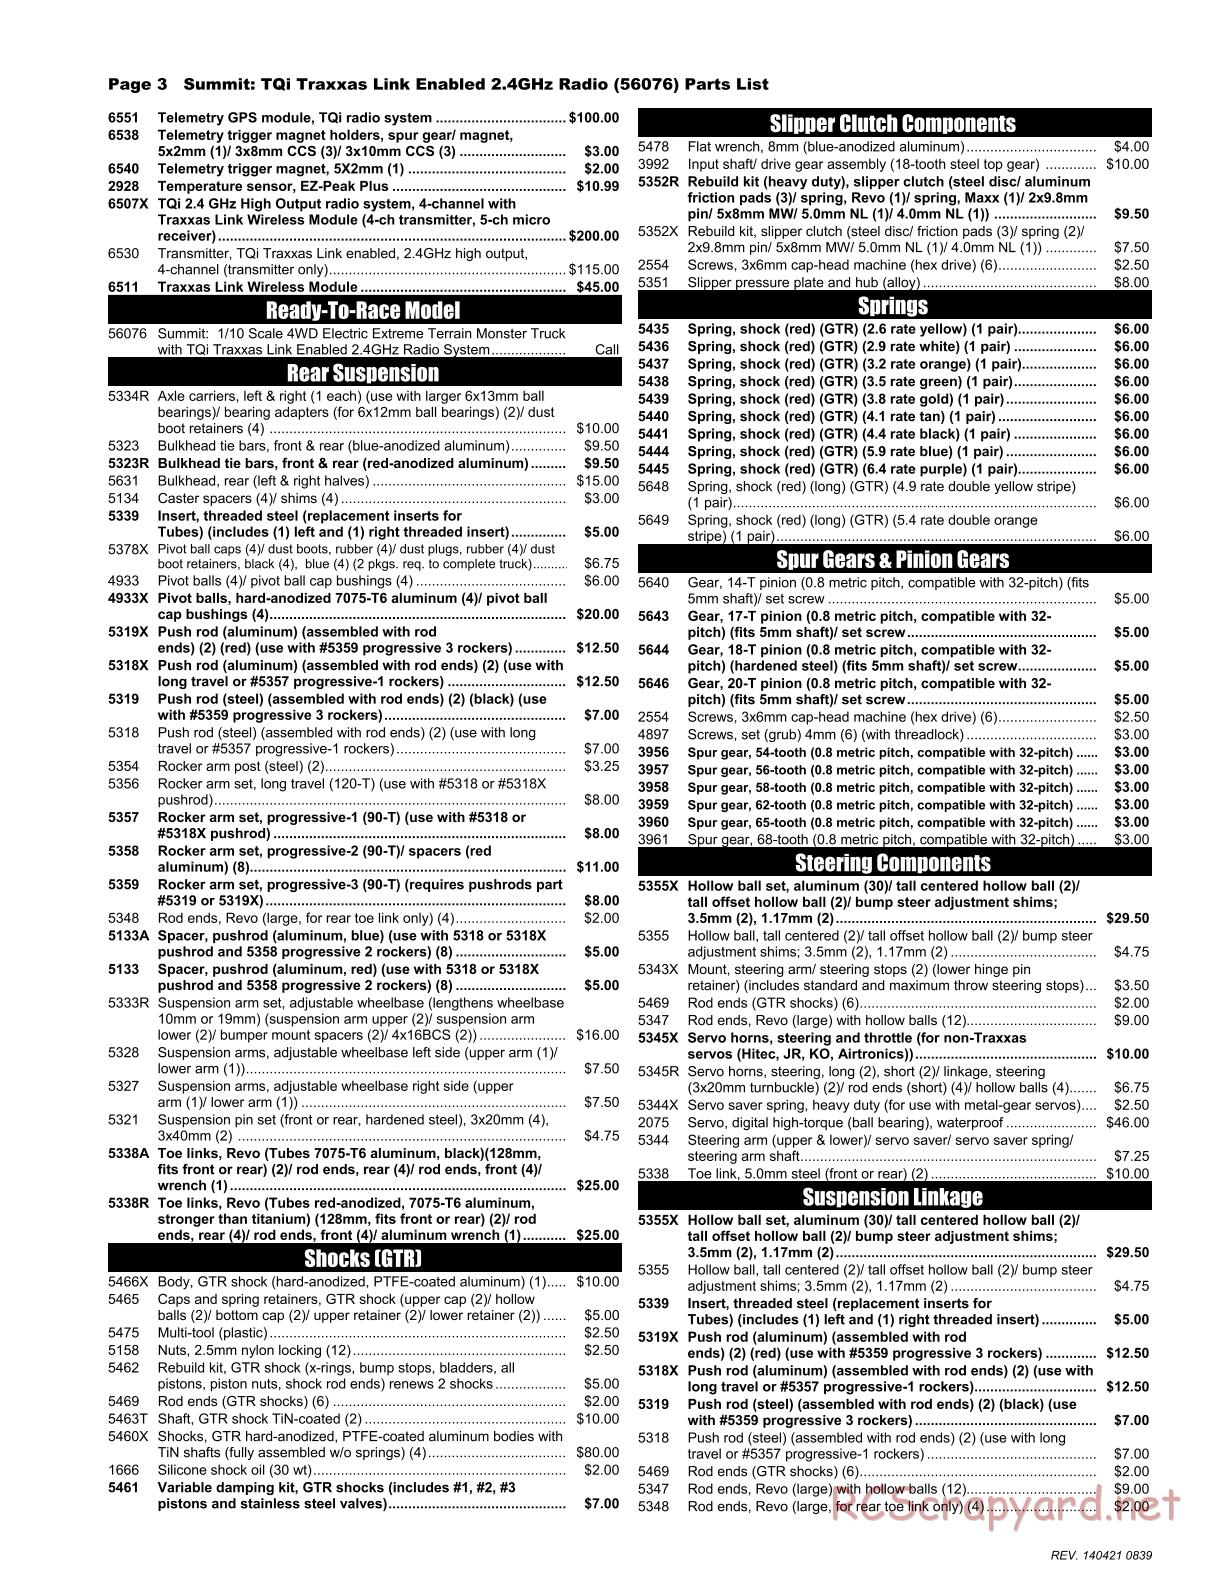 Traxxas - Summit (2014) - Parts List - Page 3